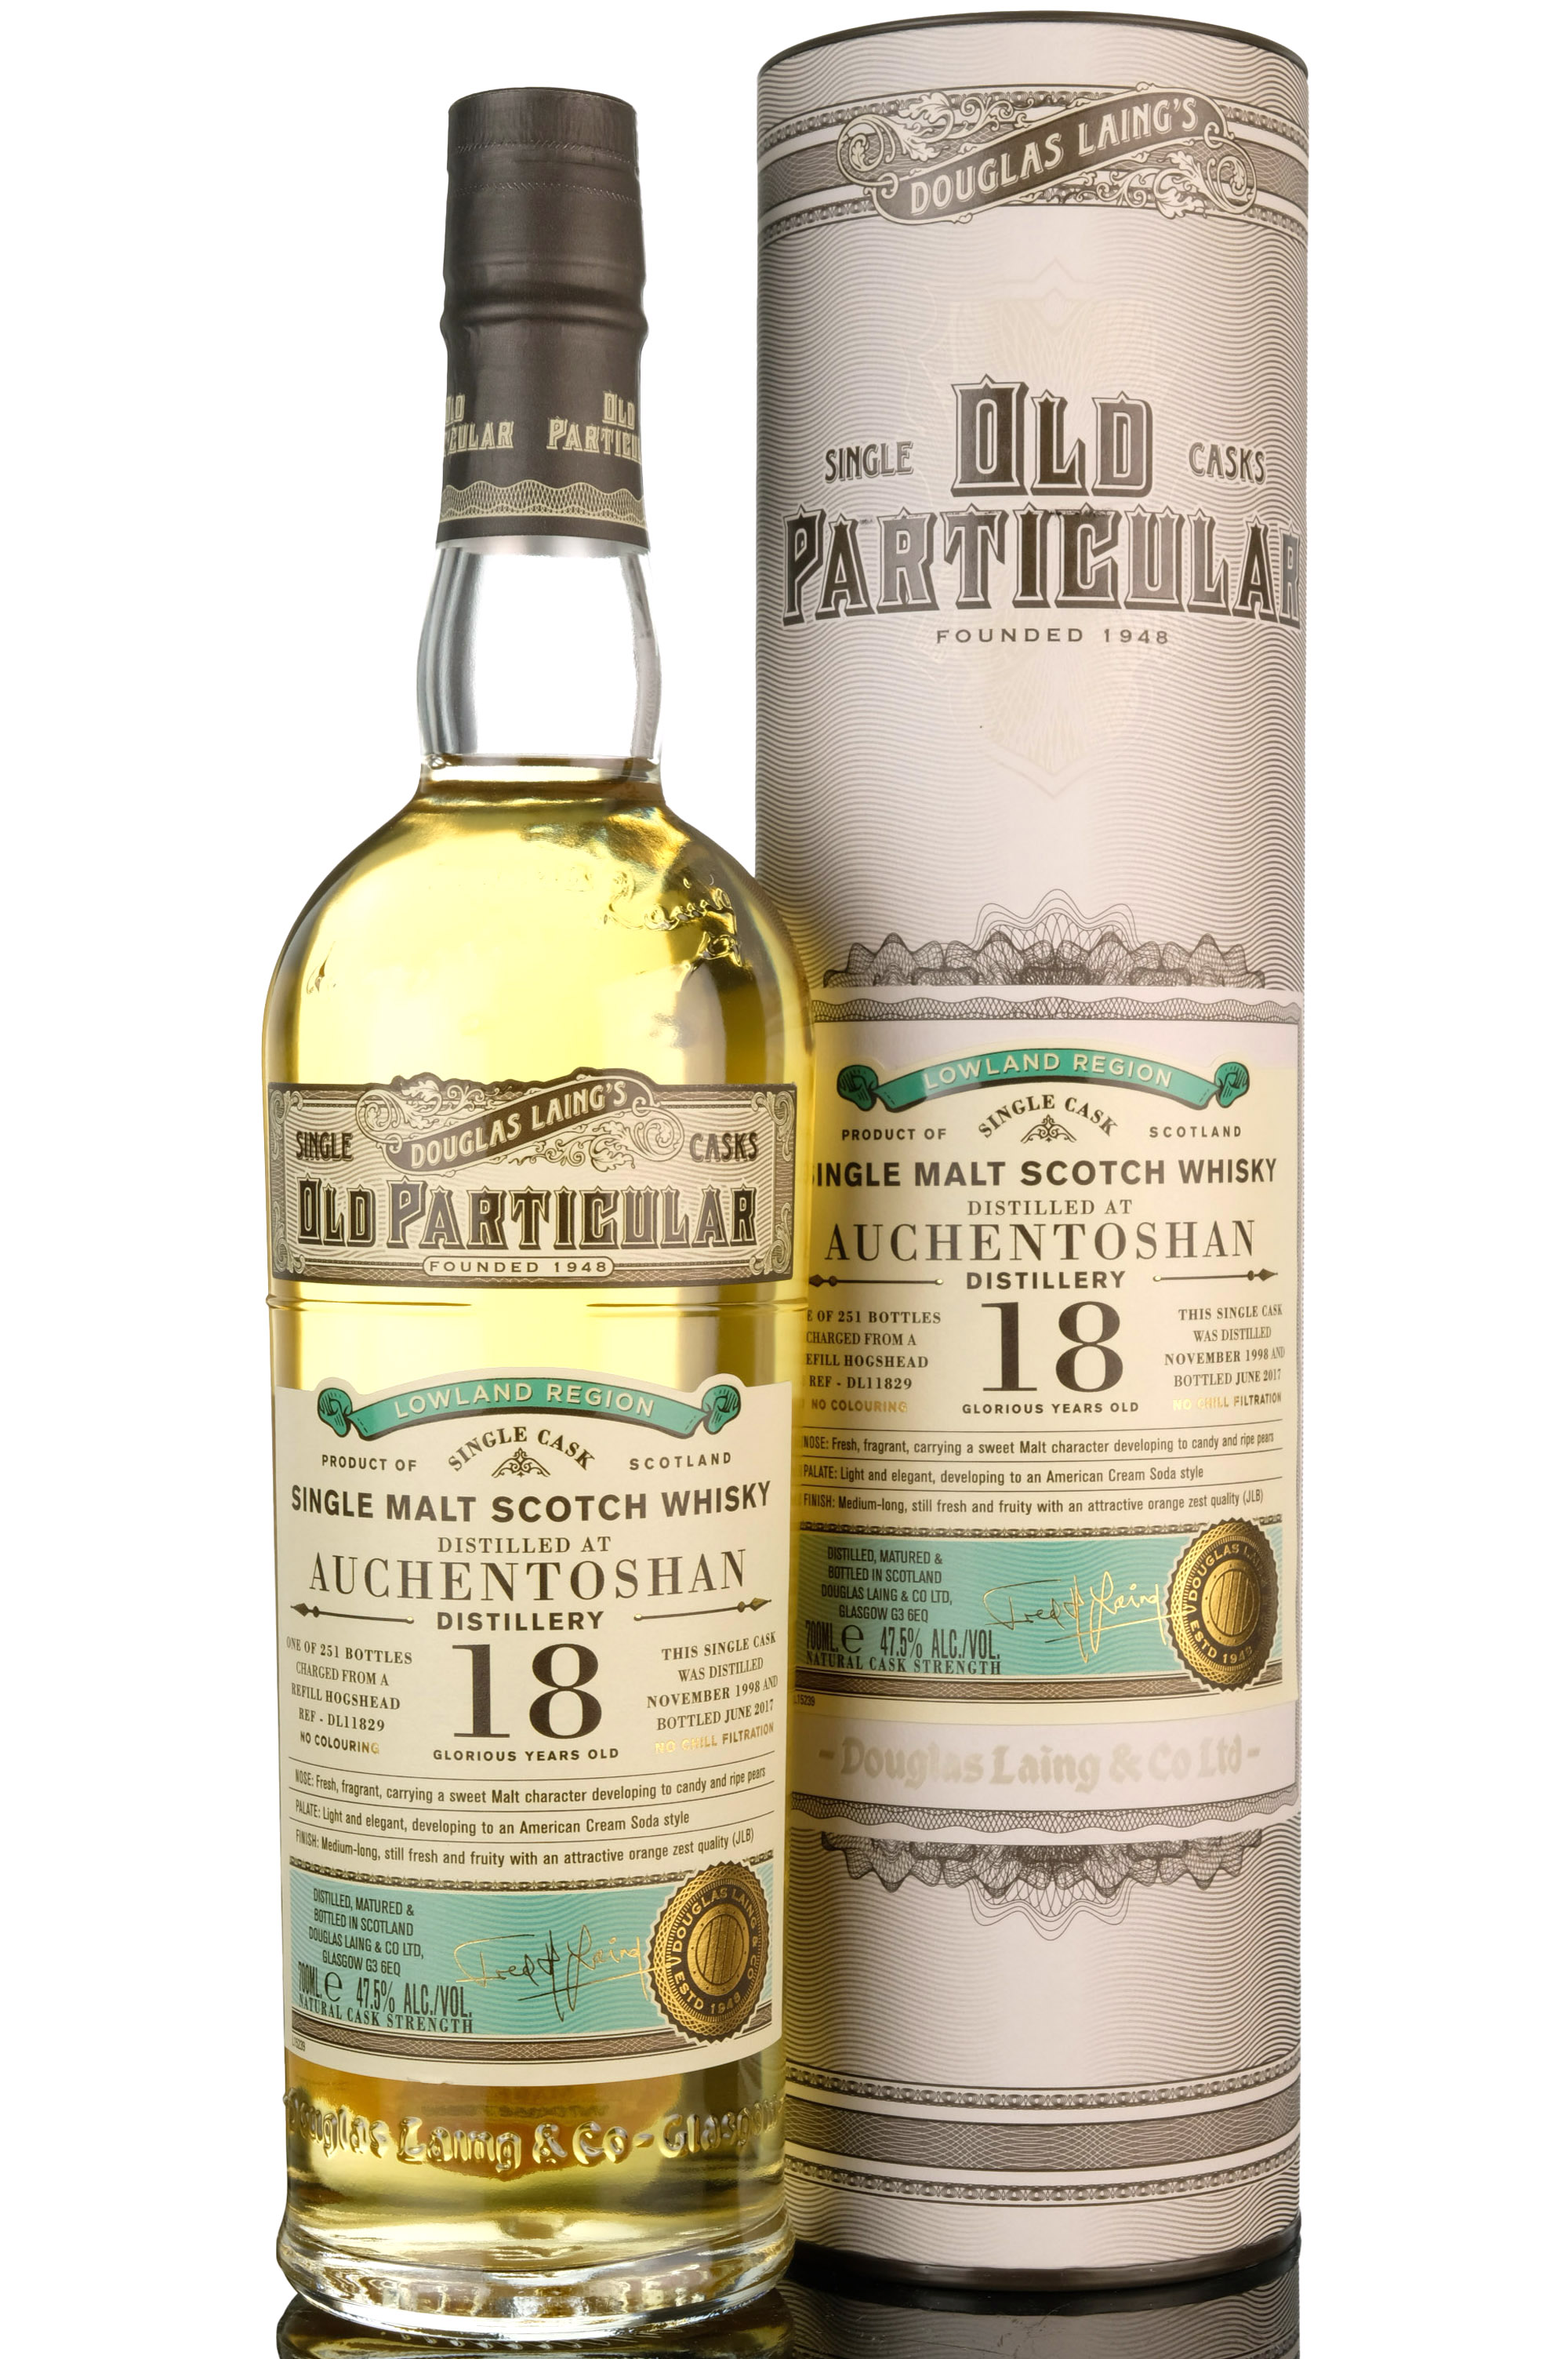 Auchentoshan 1998-2017 - 18 Year Old - Douglas Laing - Old Particular - Single Cask 11829